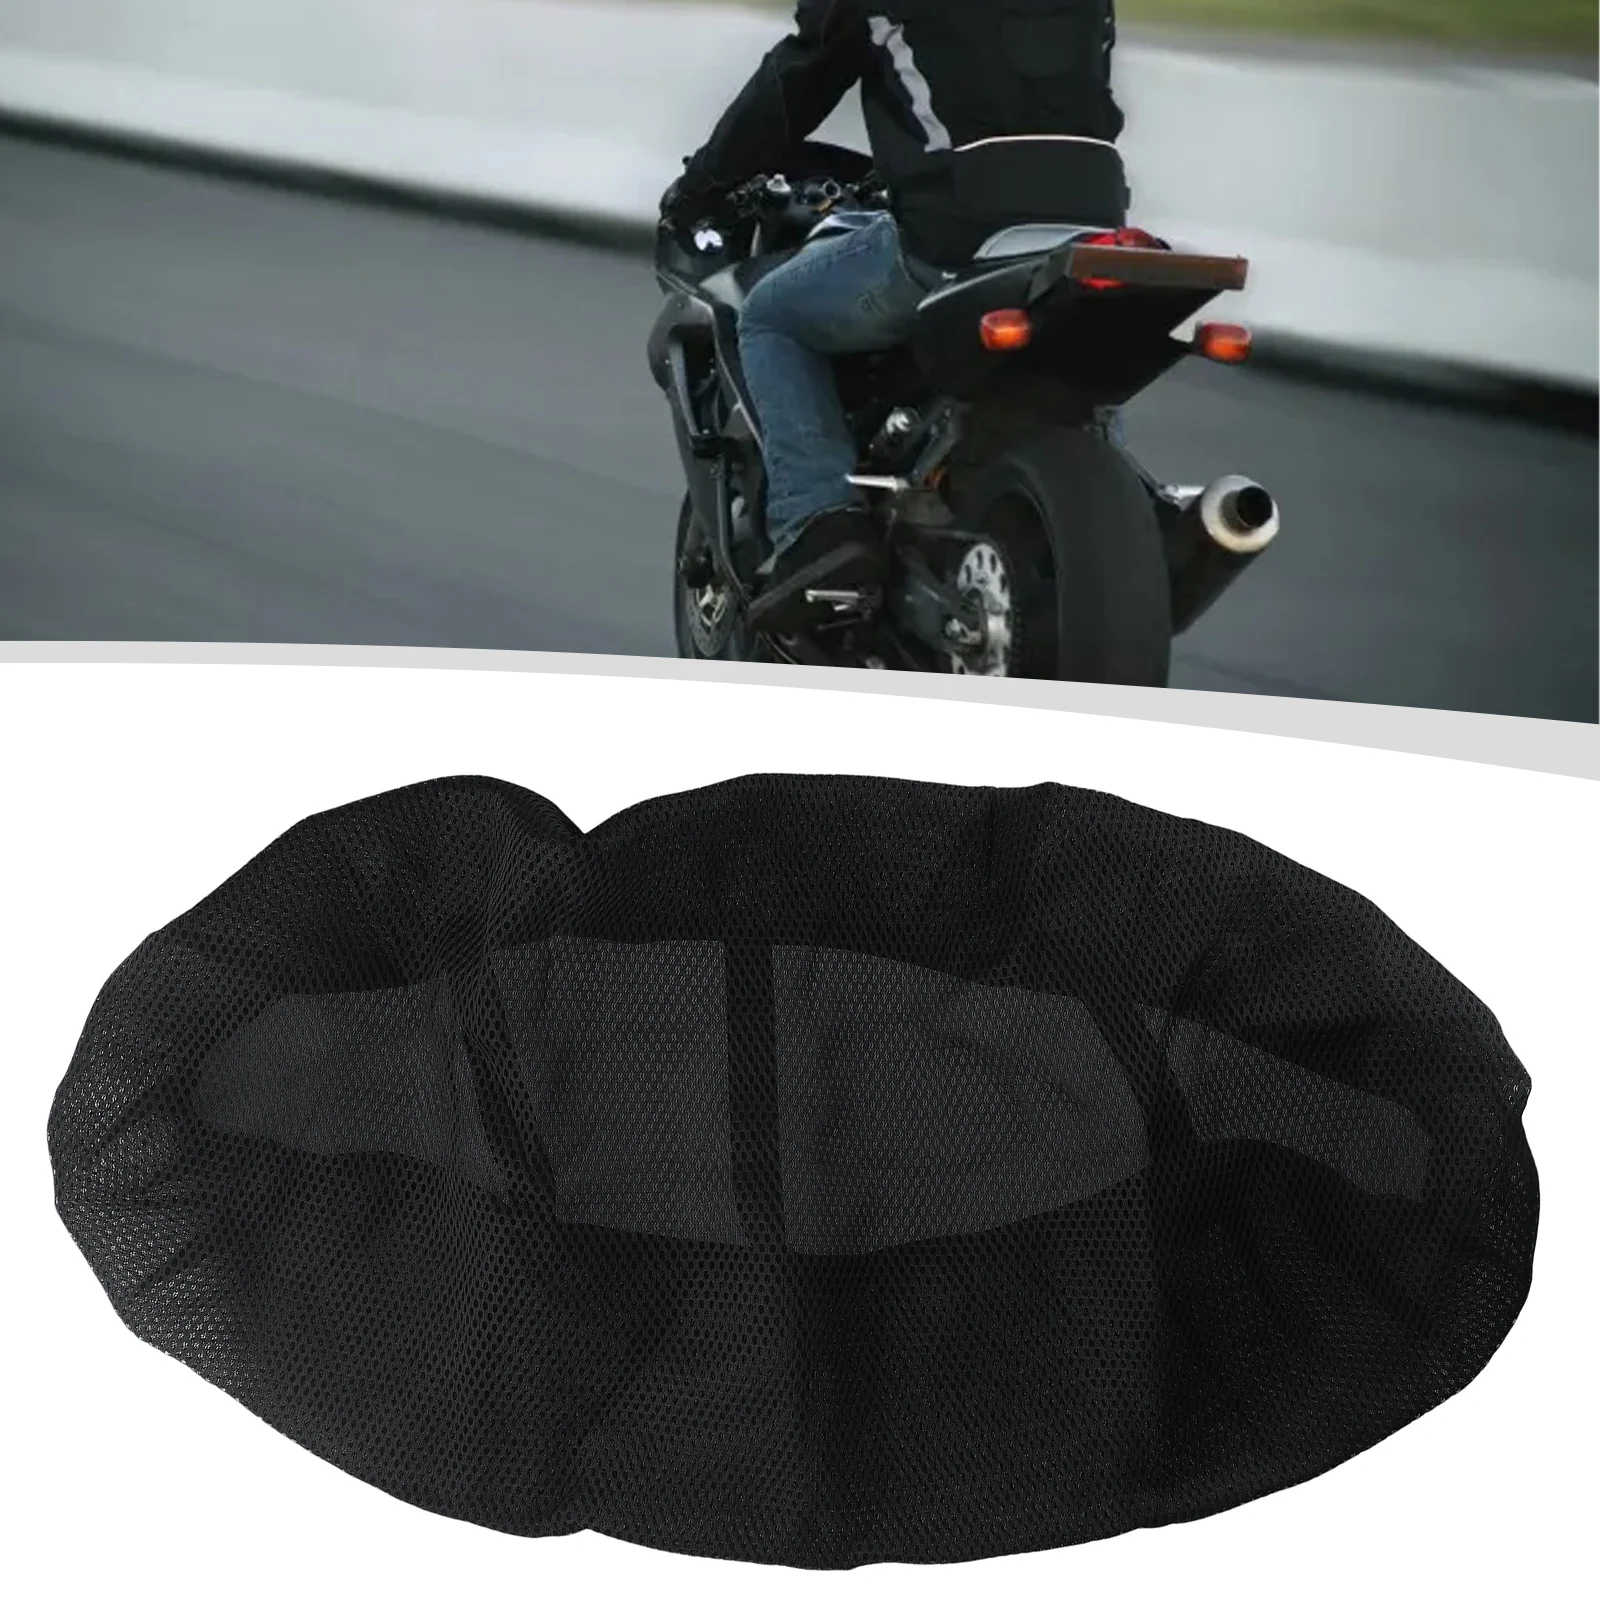 

Anti-Slip Cushion Mesh Net Motorcycle Breathable For Seat Cover Pad 85*60CM Heat-Resistant, Breathable, Moisture-Proof,